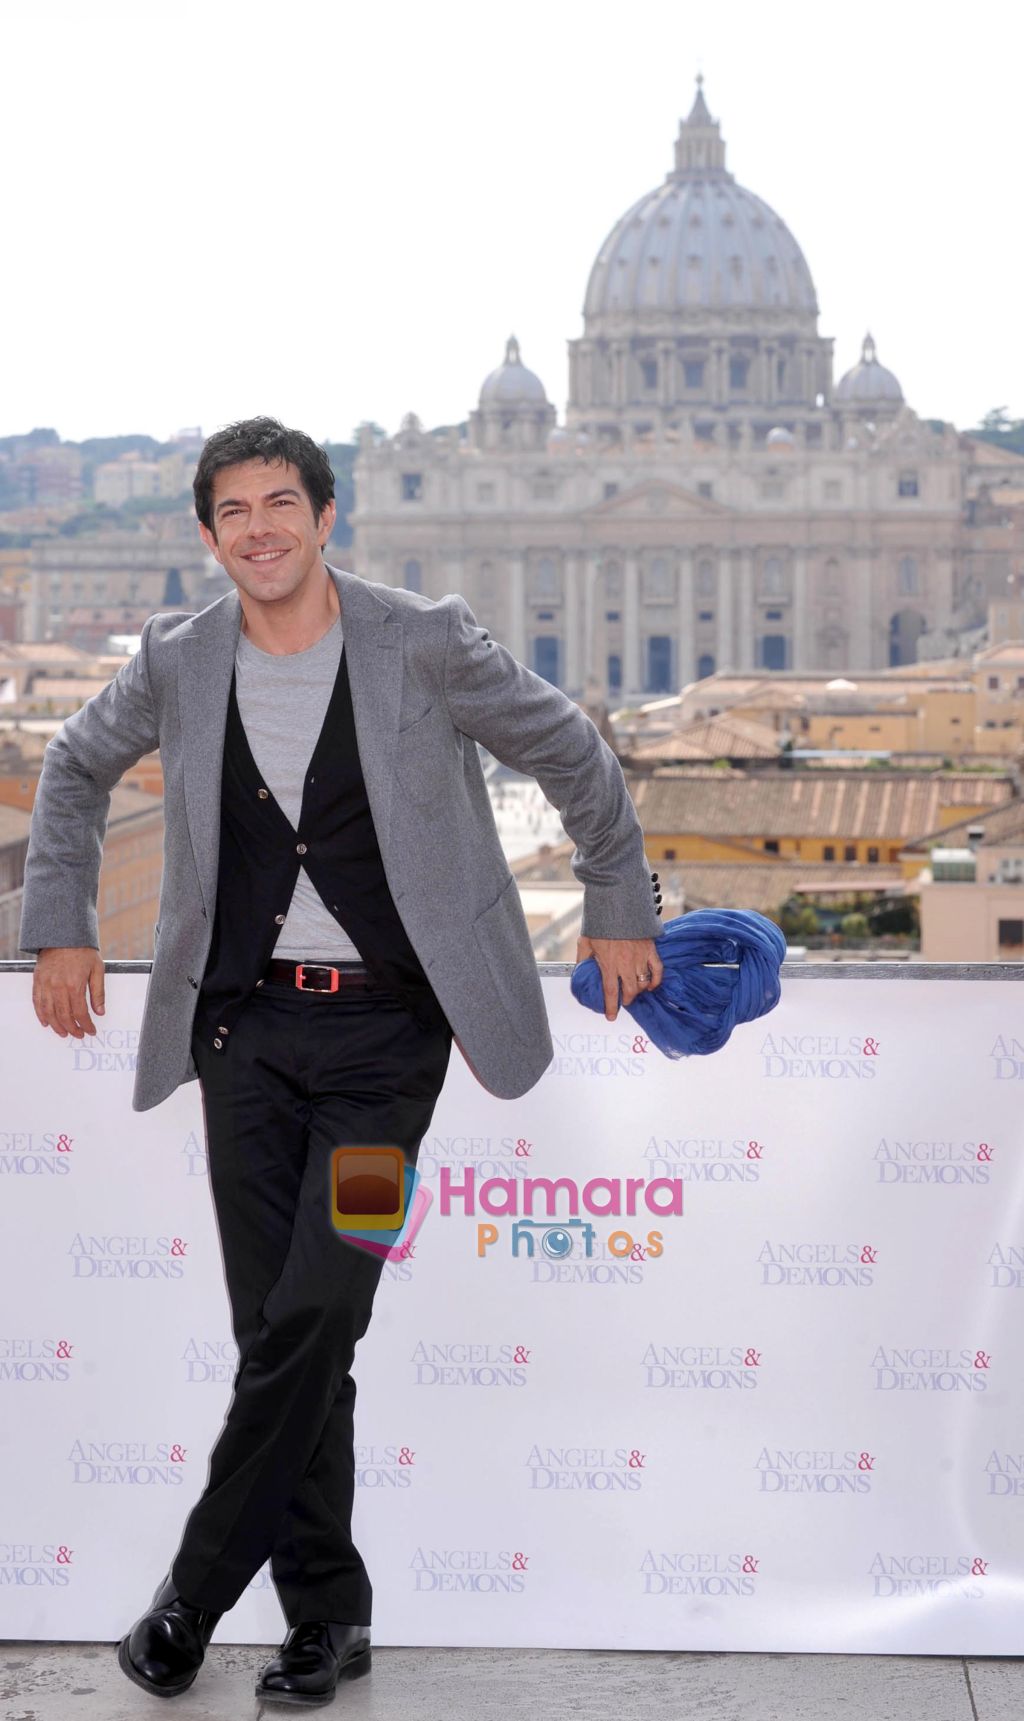 Sony Pictures Angels & Demons Photo Call in Rome, Italy on May 3, 2009 